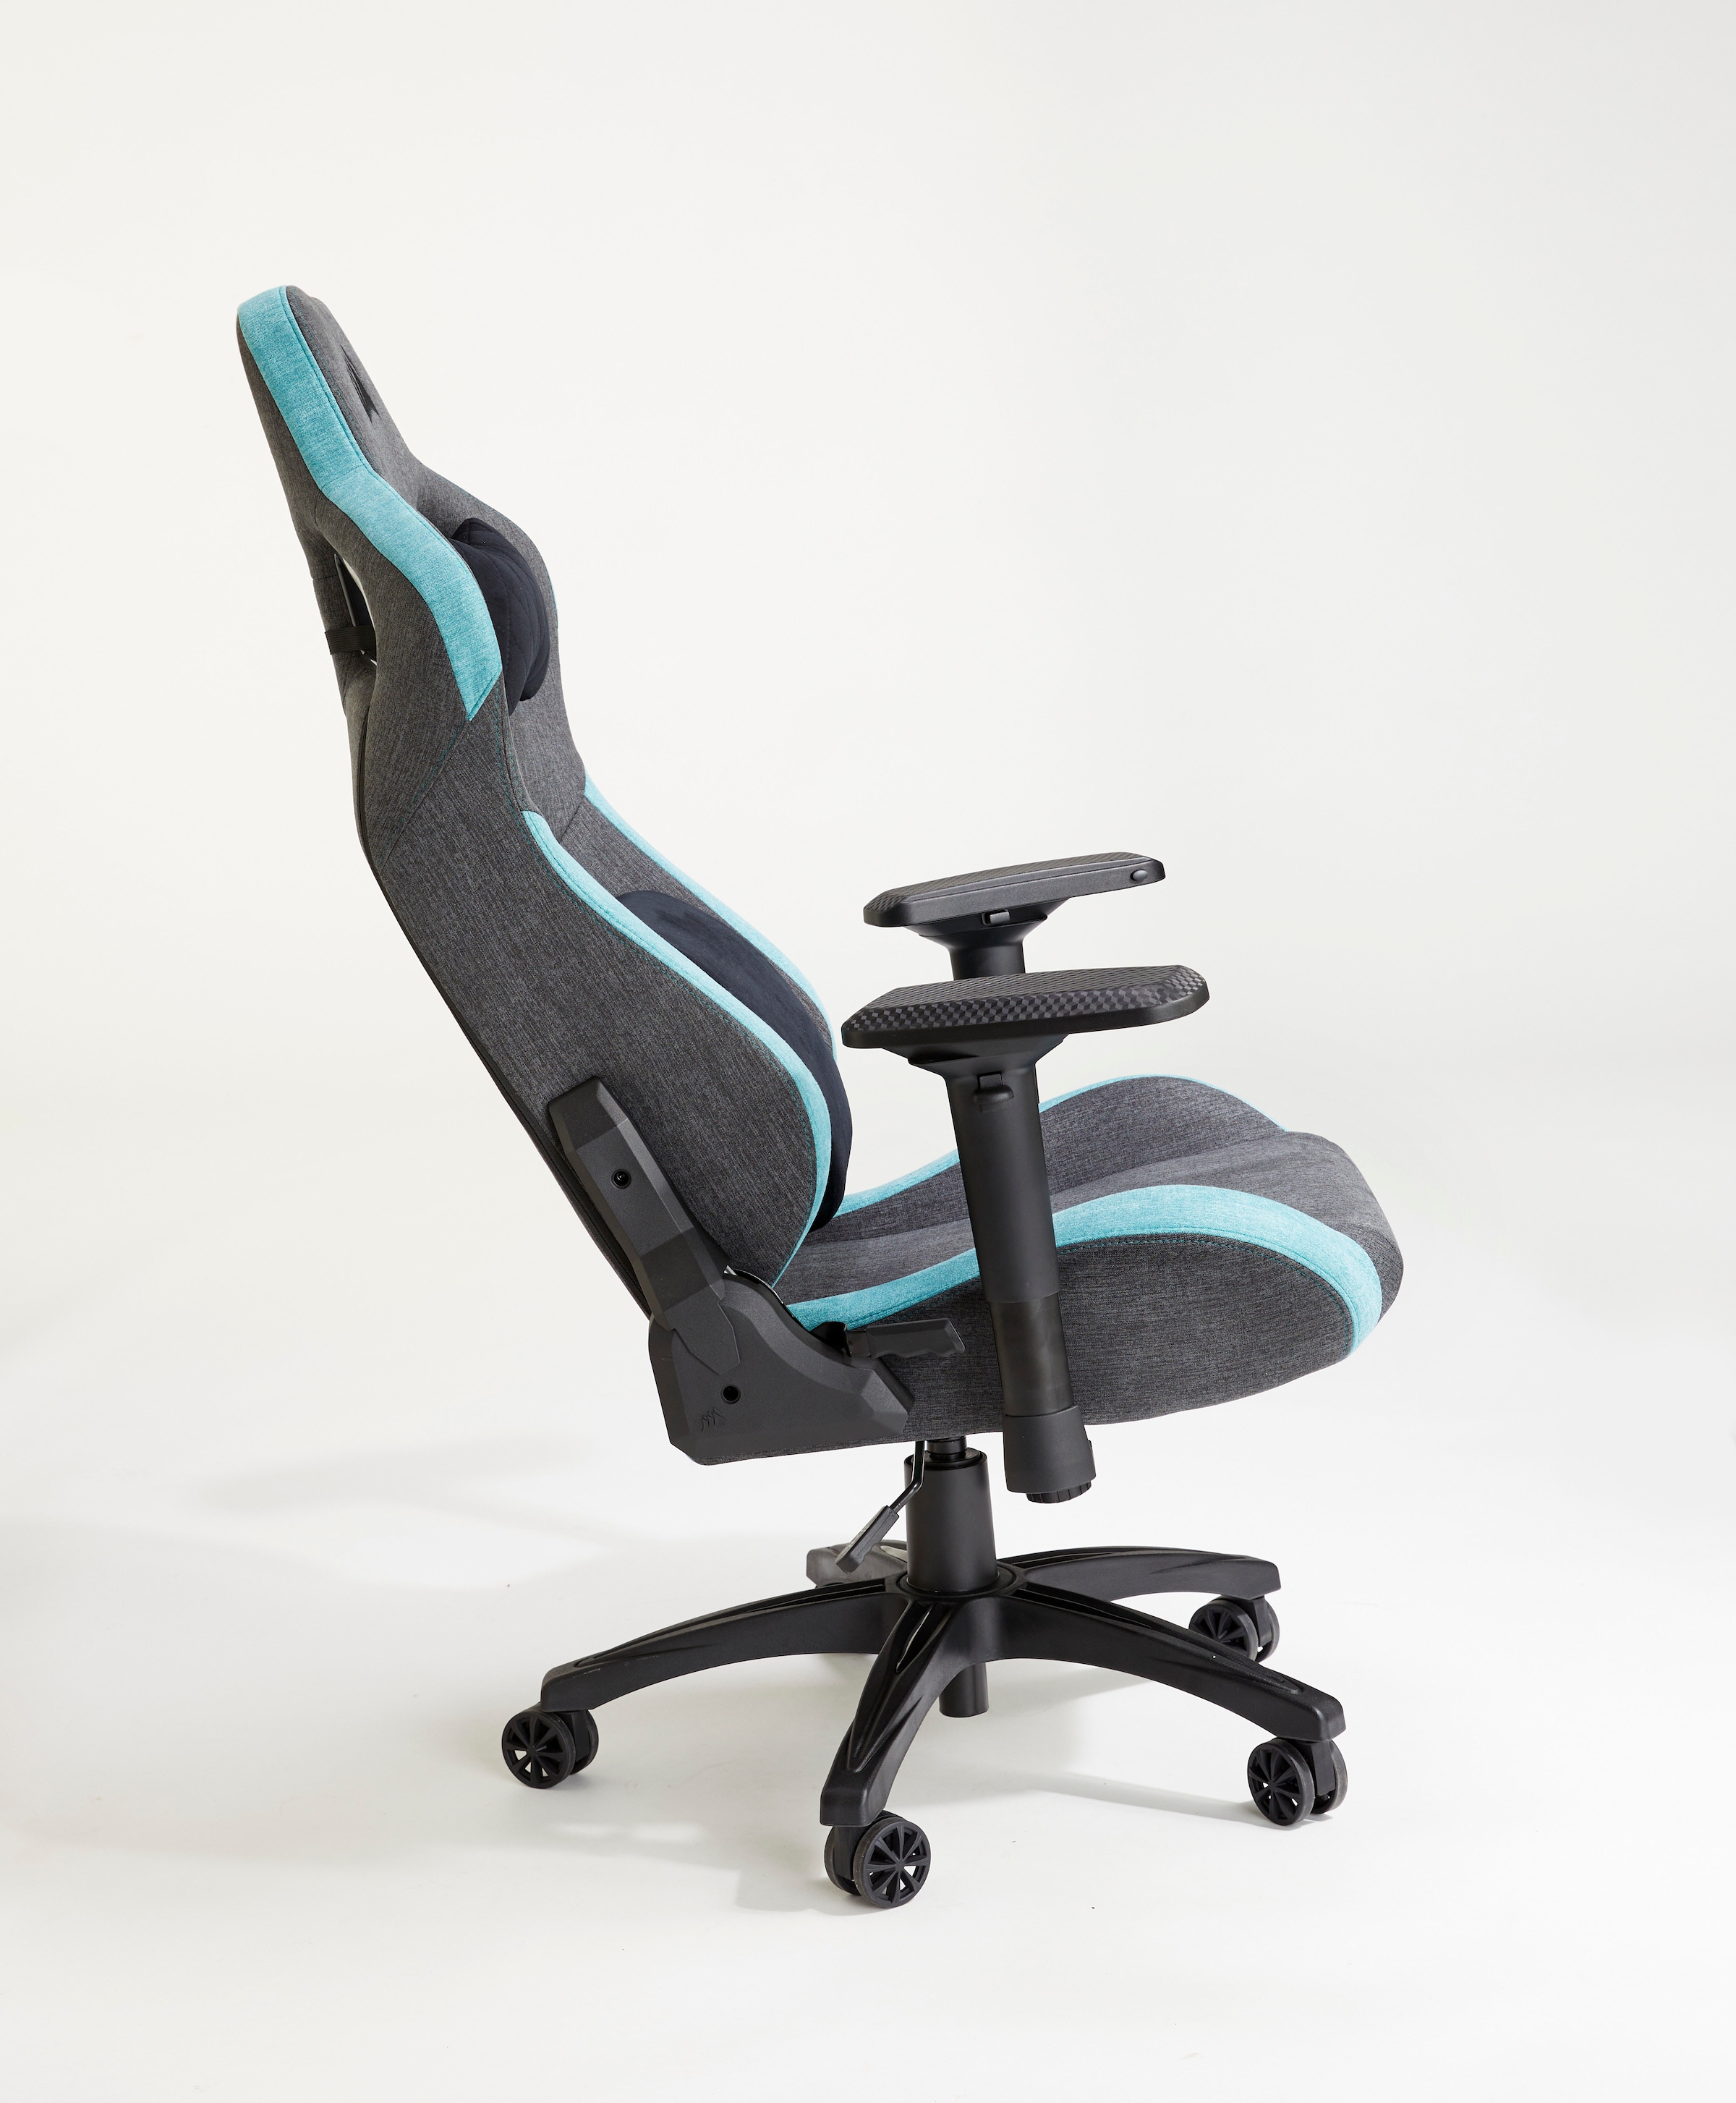 Gaming Exterior UNIVERSAL Racing-Inspired Fabric Soft Design, Gaming bei Chair«, Rush »T3 Chair Corsair Fabric online